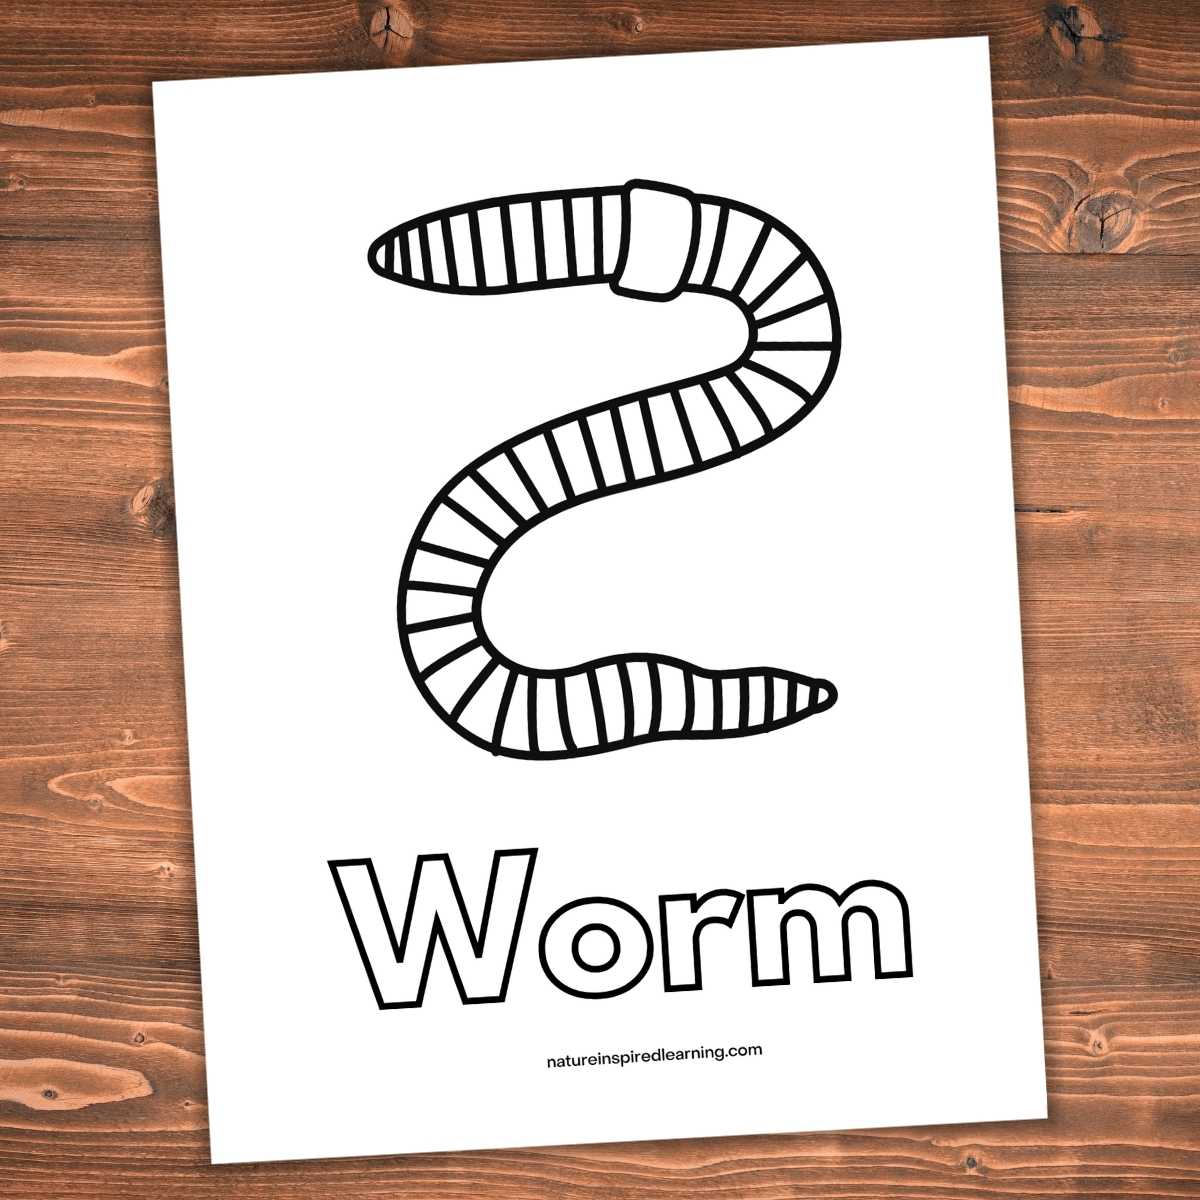 Wiggly worm coloring pages